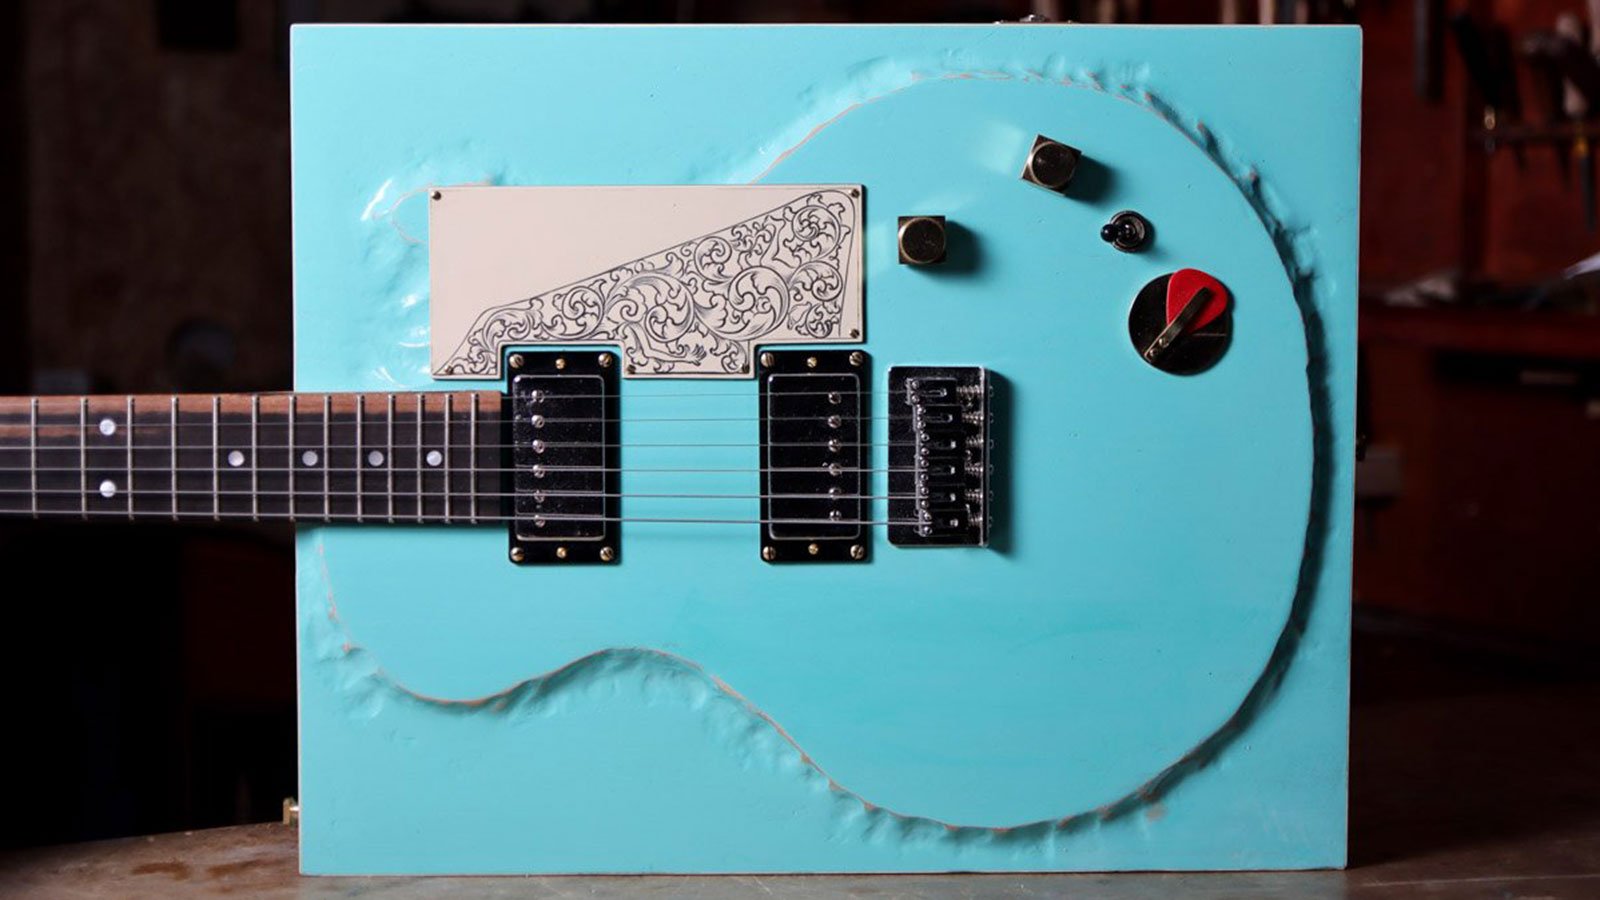 Uri Tuchman reinvents the one-decrease… by making no cuts: meet the YouTuber’s bonkers sq. guitar originate